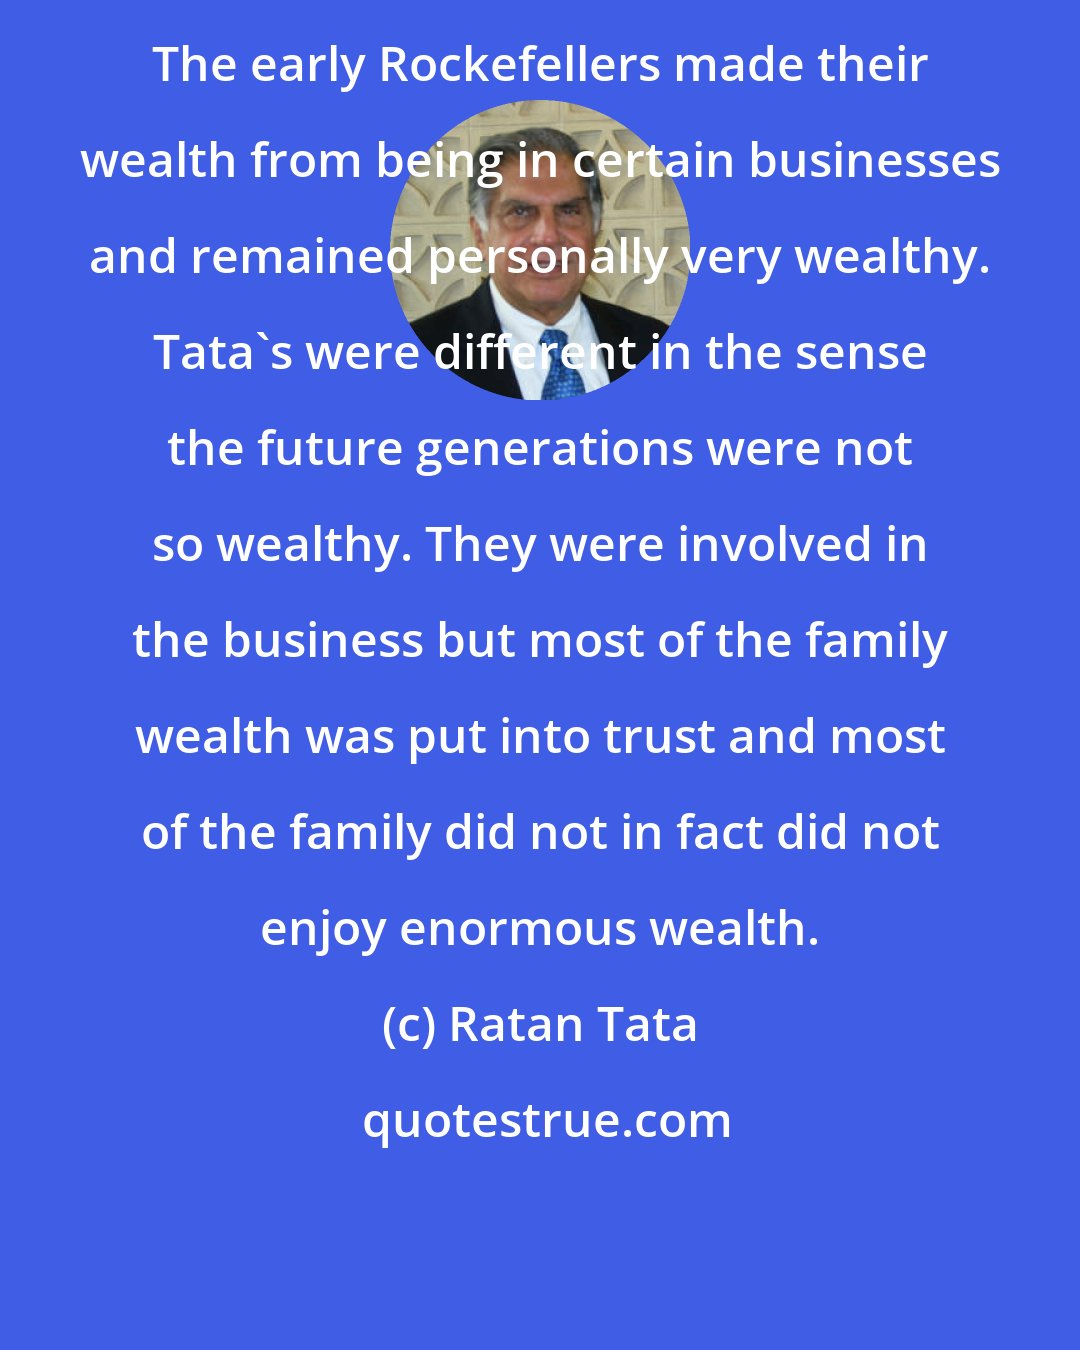 Ratan Tata: The early Rockefellers made their wealth from being in certain businesses and remained personally very wealthy. Tata's were different in the sense the future generations were not so wealthy. They were involved in the business but most of the family wealth was put into trust and most of the family did not in fact did not enjoy enormous wealth.